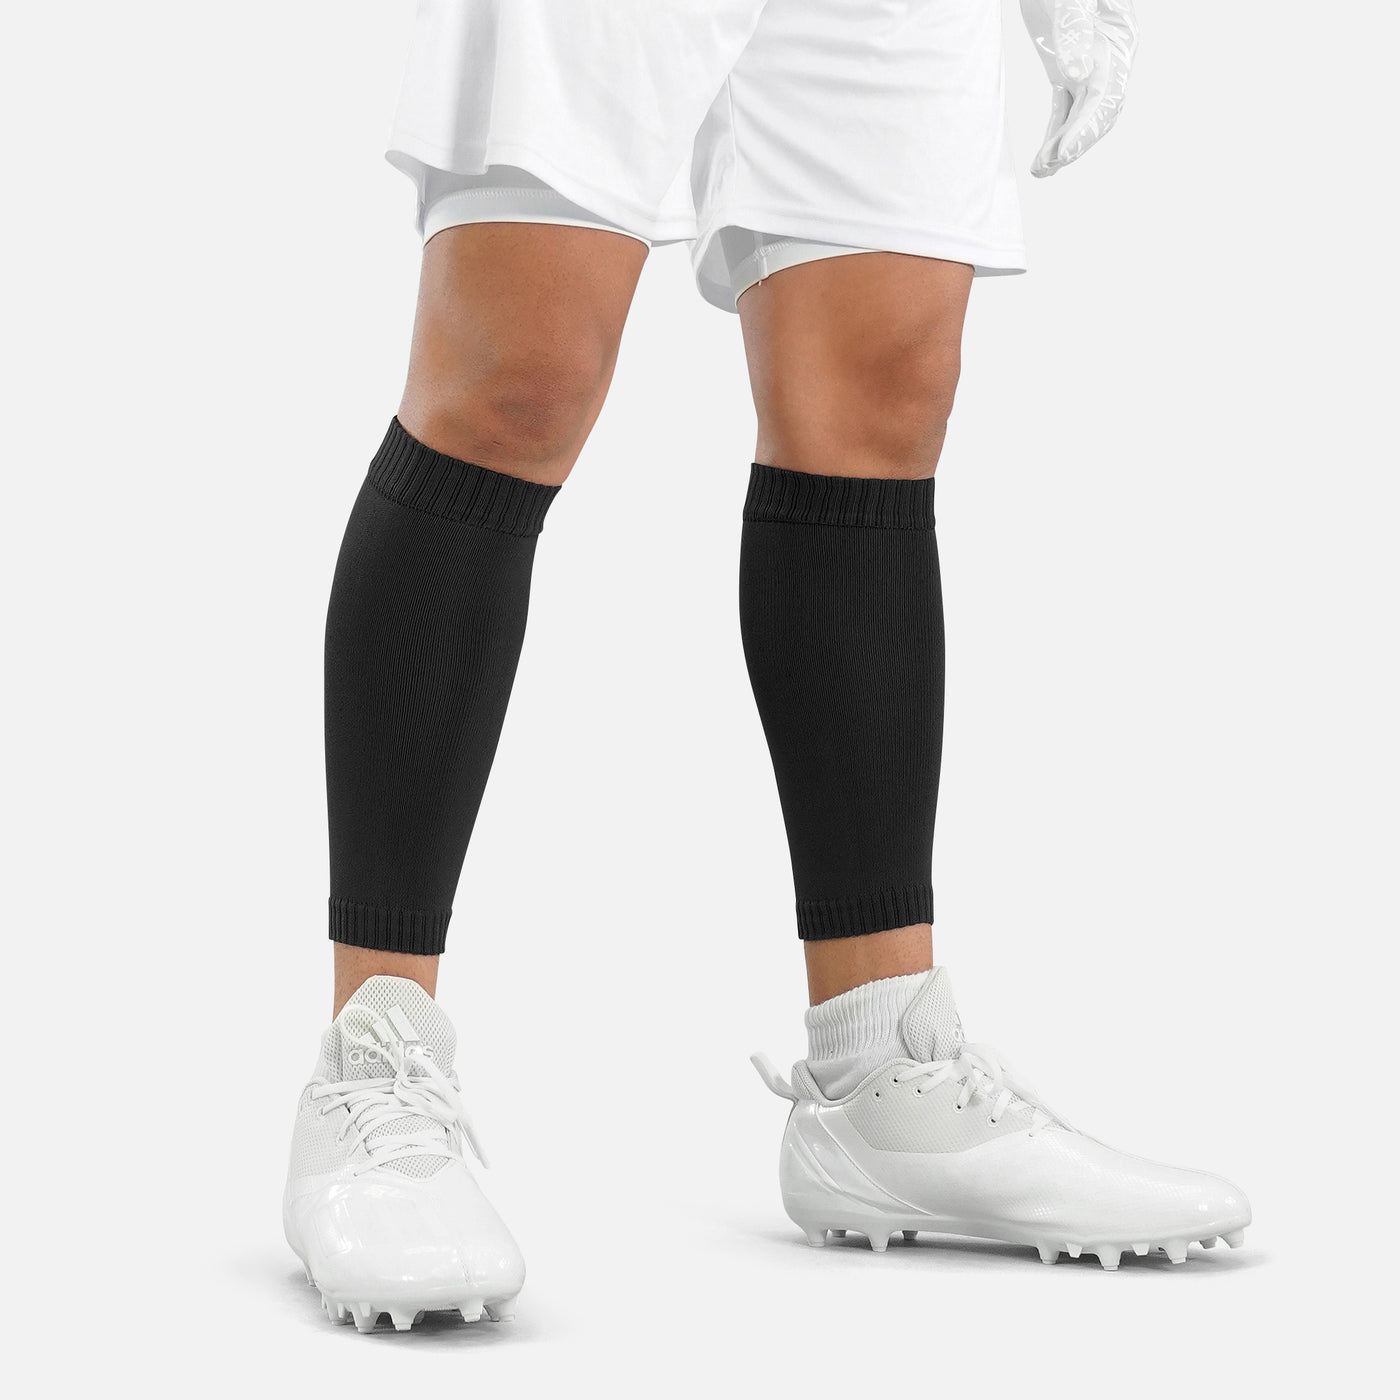 Basic Black Knitted Compression Calf Sleeves